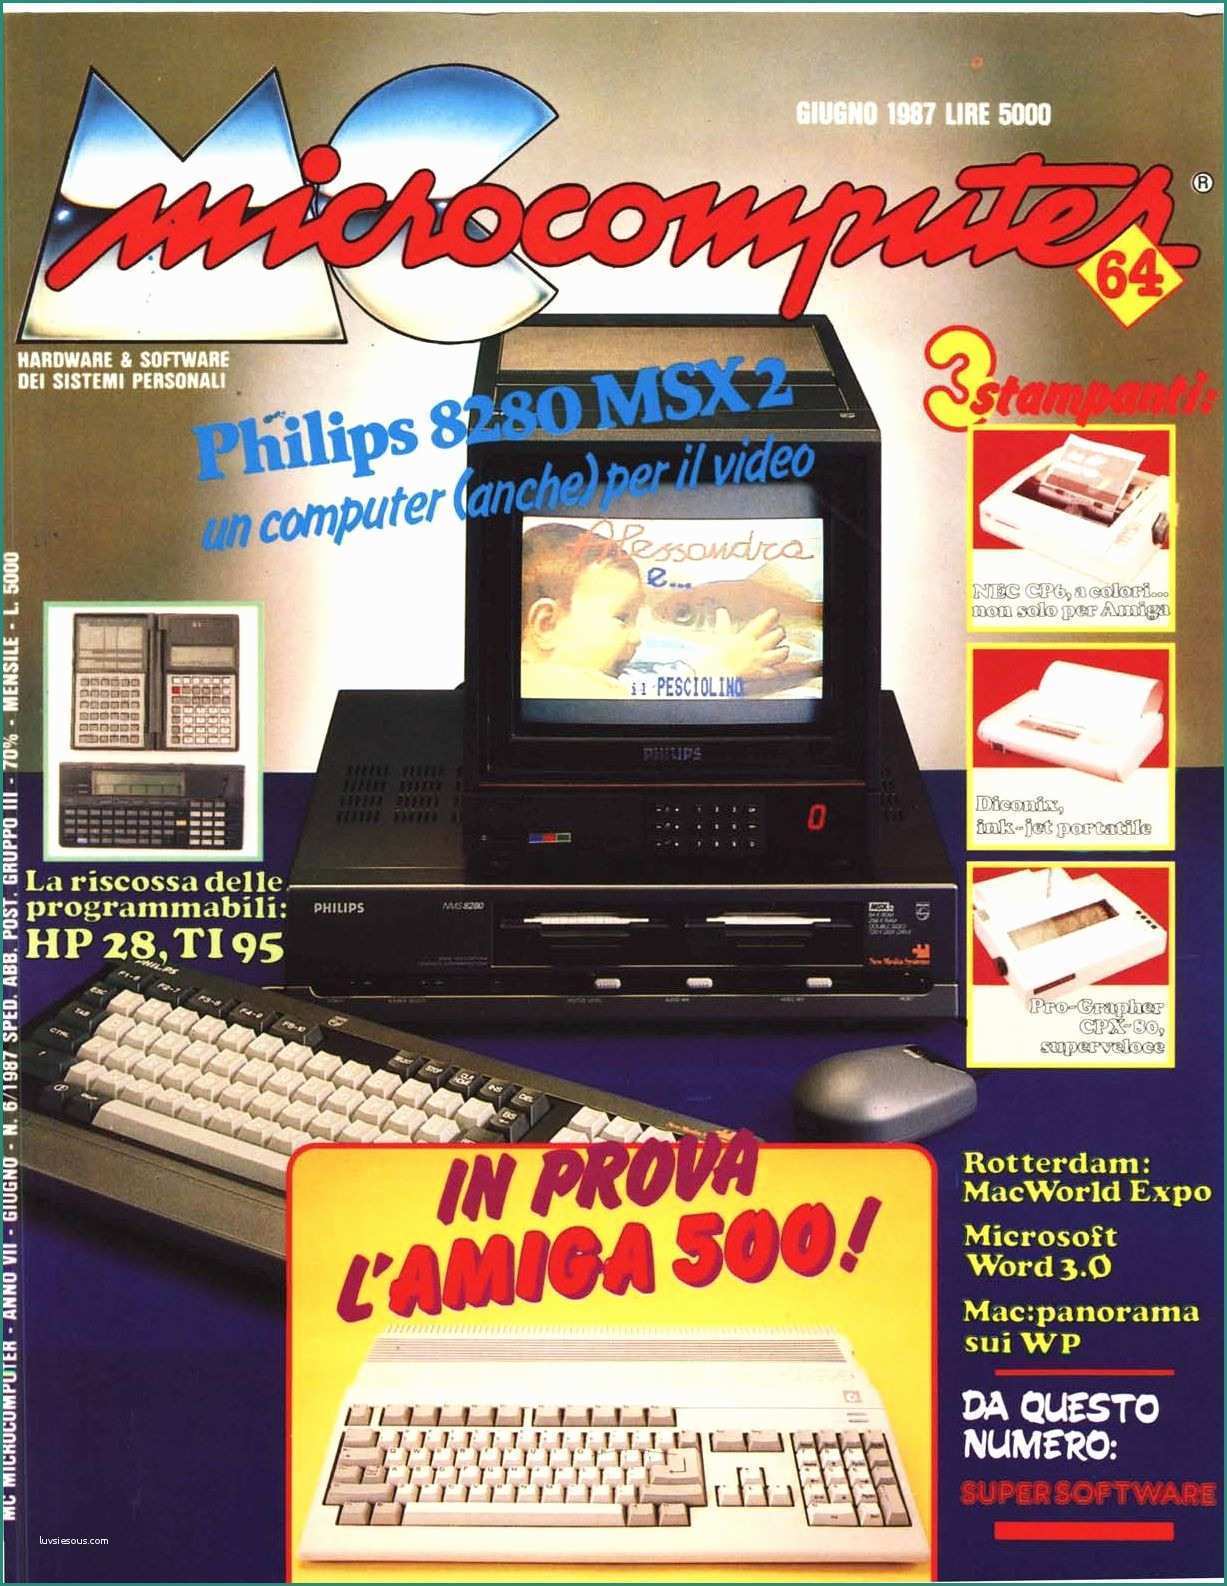 Consolle Ingresso Moderne E 064 Mcmicro Puter by Adpware issuu